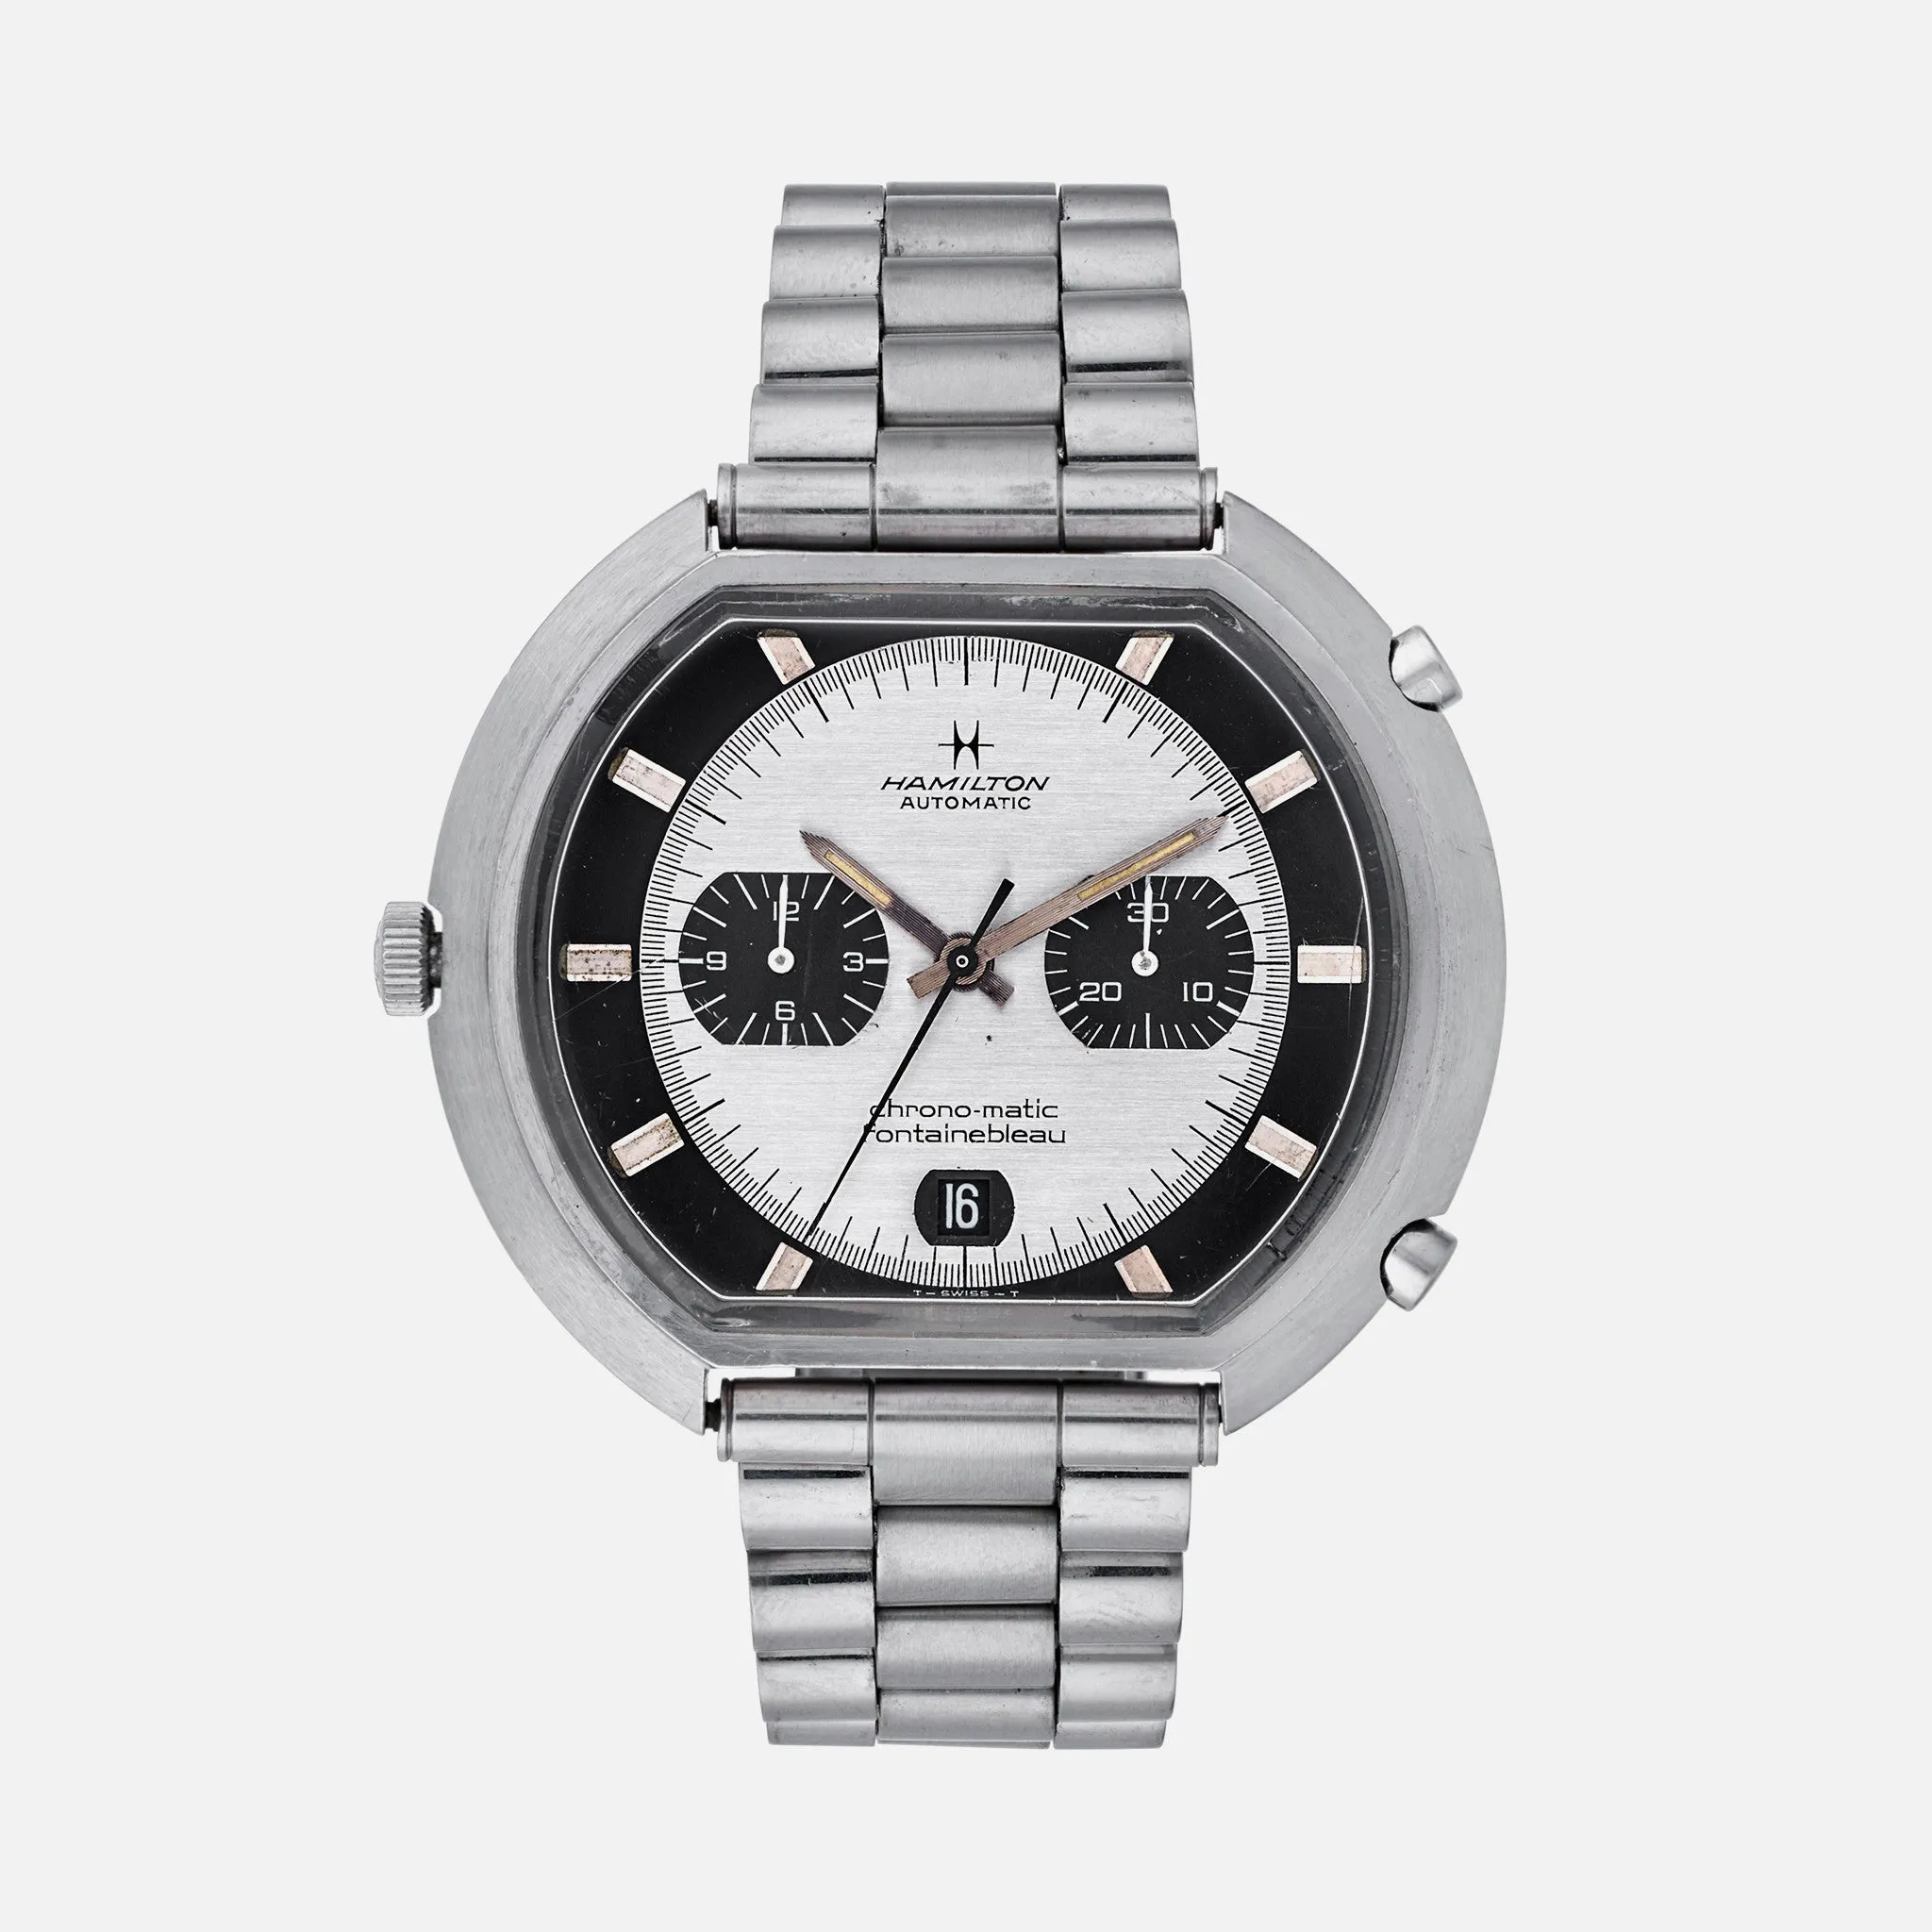 Hamilton Chrono-Matic Fontainebleau 11001-3 nullmm Stainless steel Silver